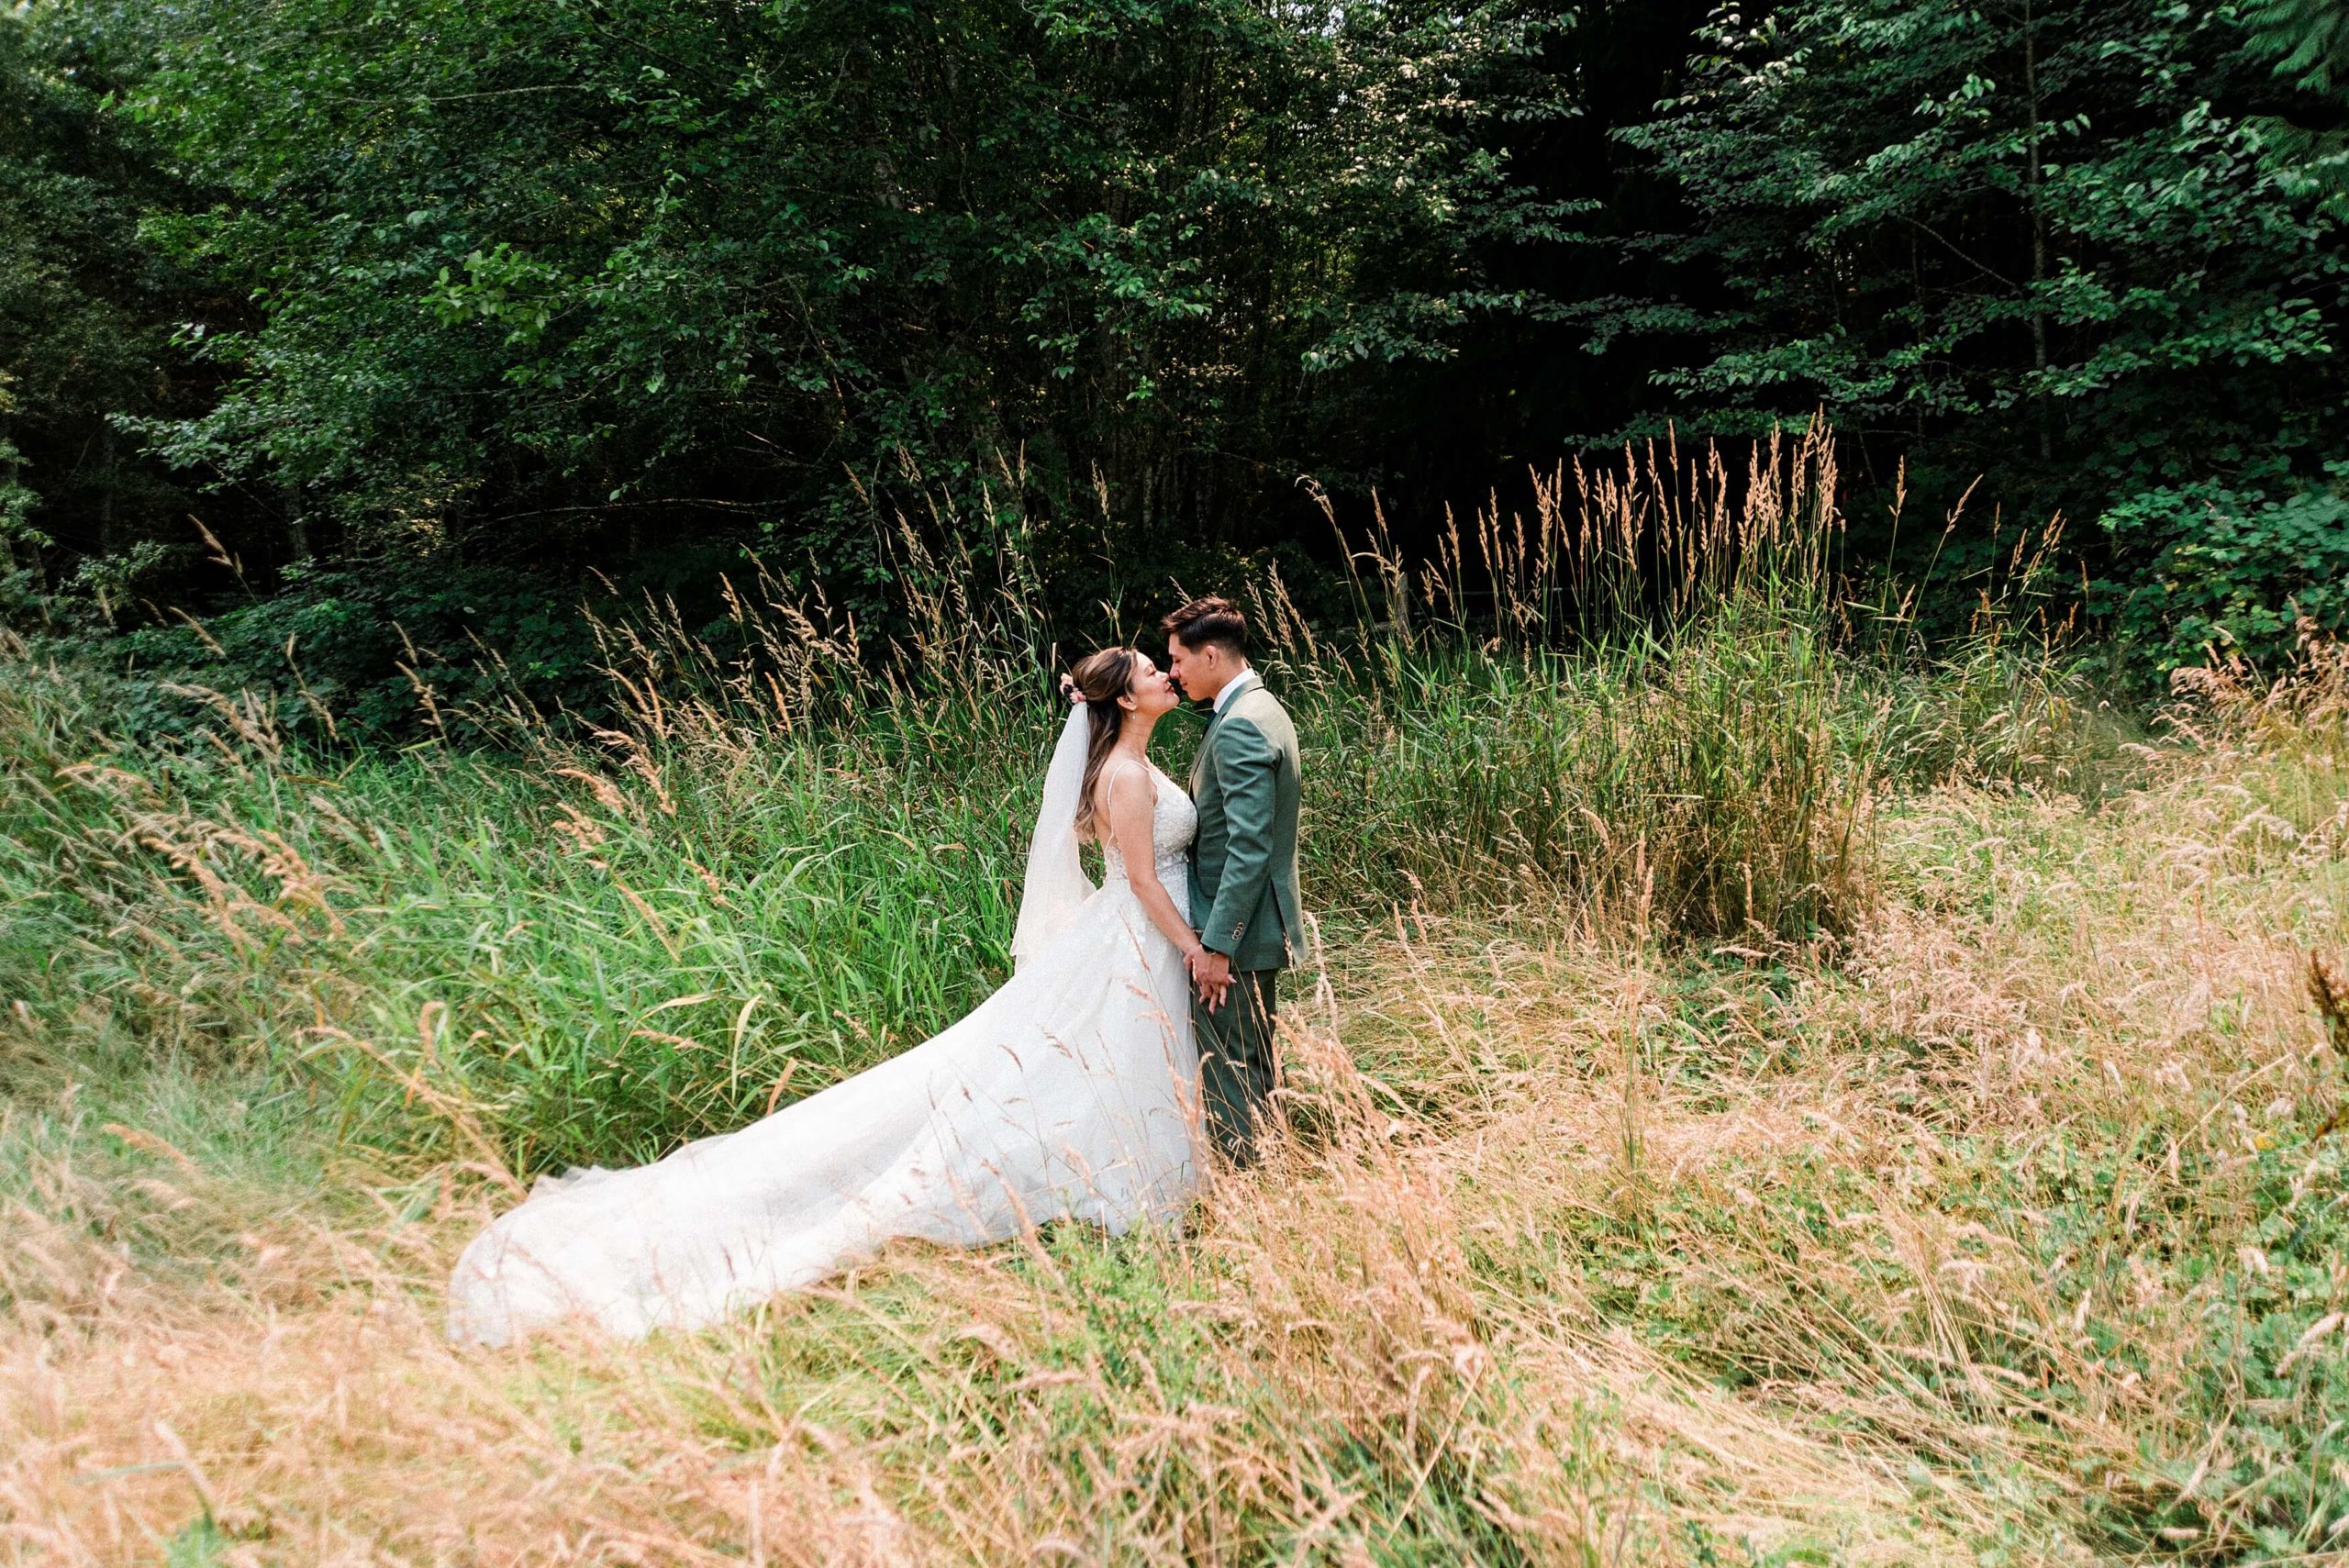 Bride and groom in a meadow at Misty Clover Farm Olympic Peninsula Wedding Venue